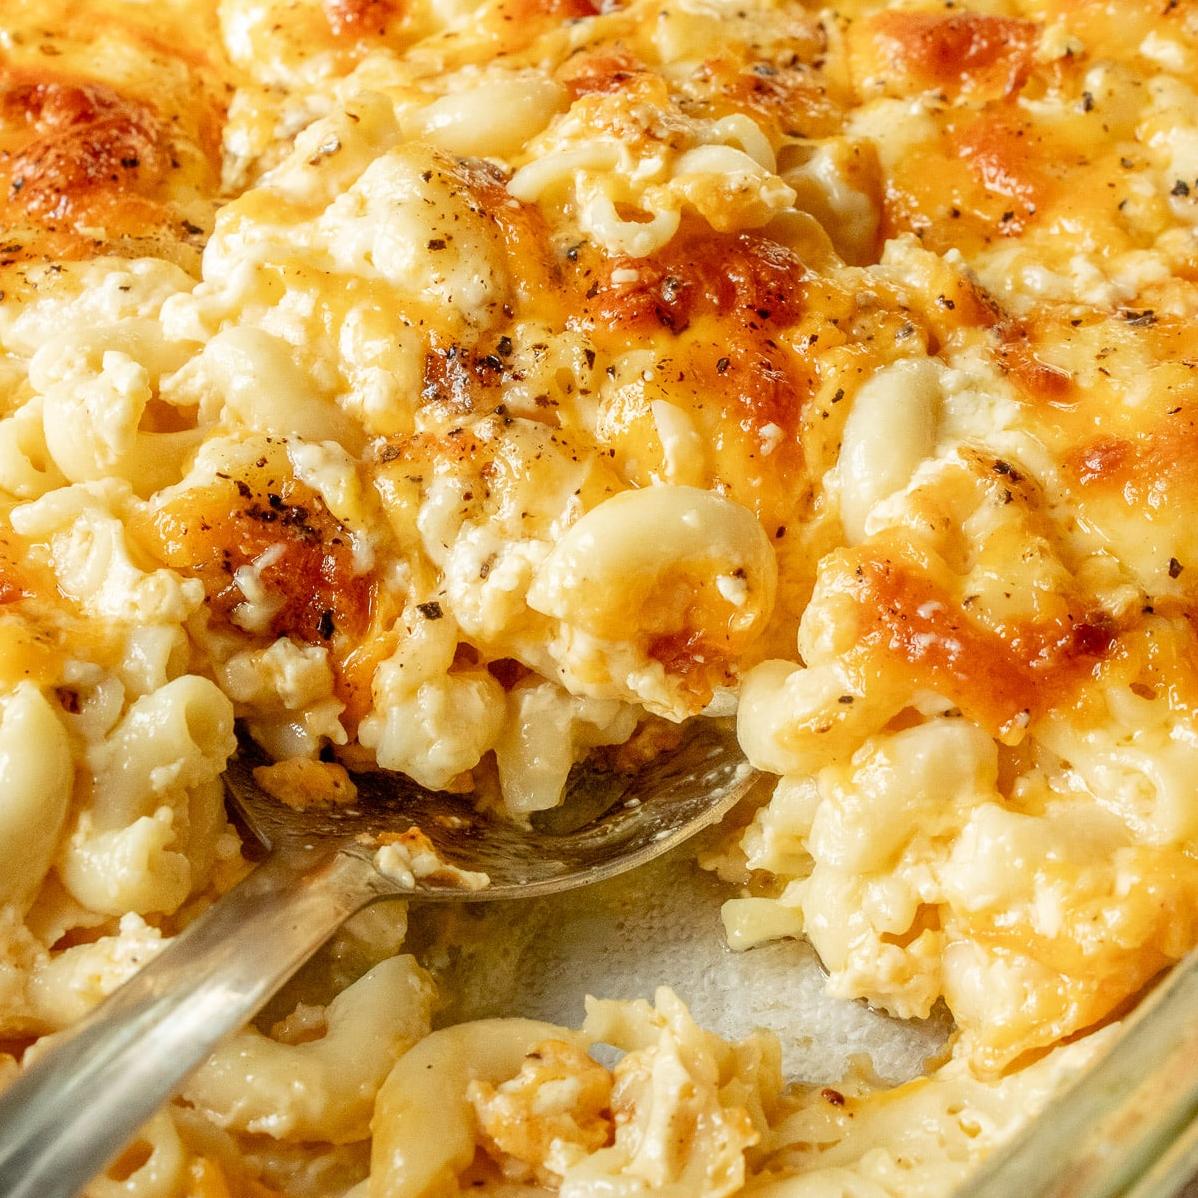  Creamy, dreamy, and oh-so cheesy, this dish is an absolute crowd pleaser!